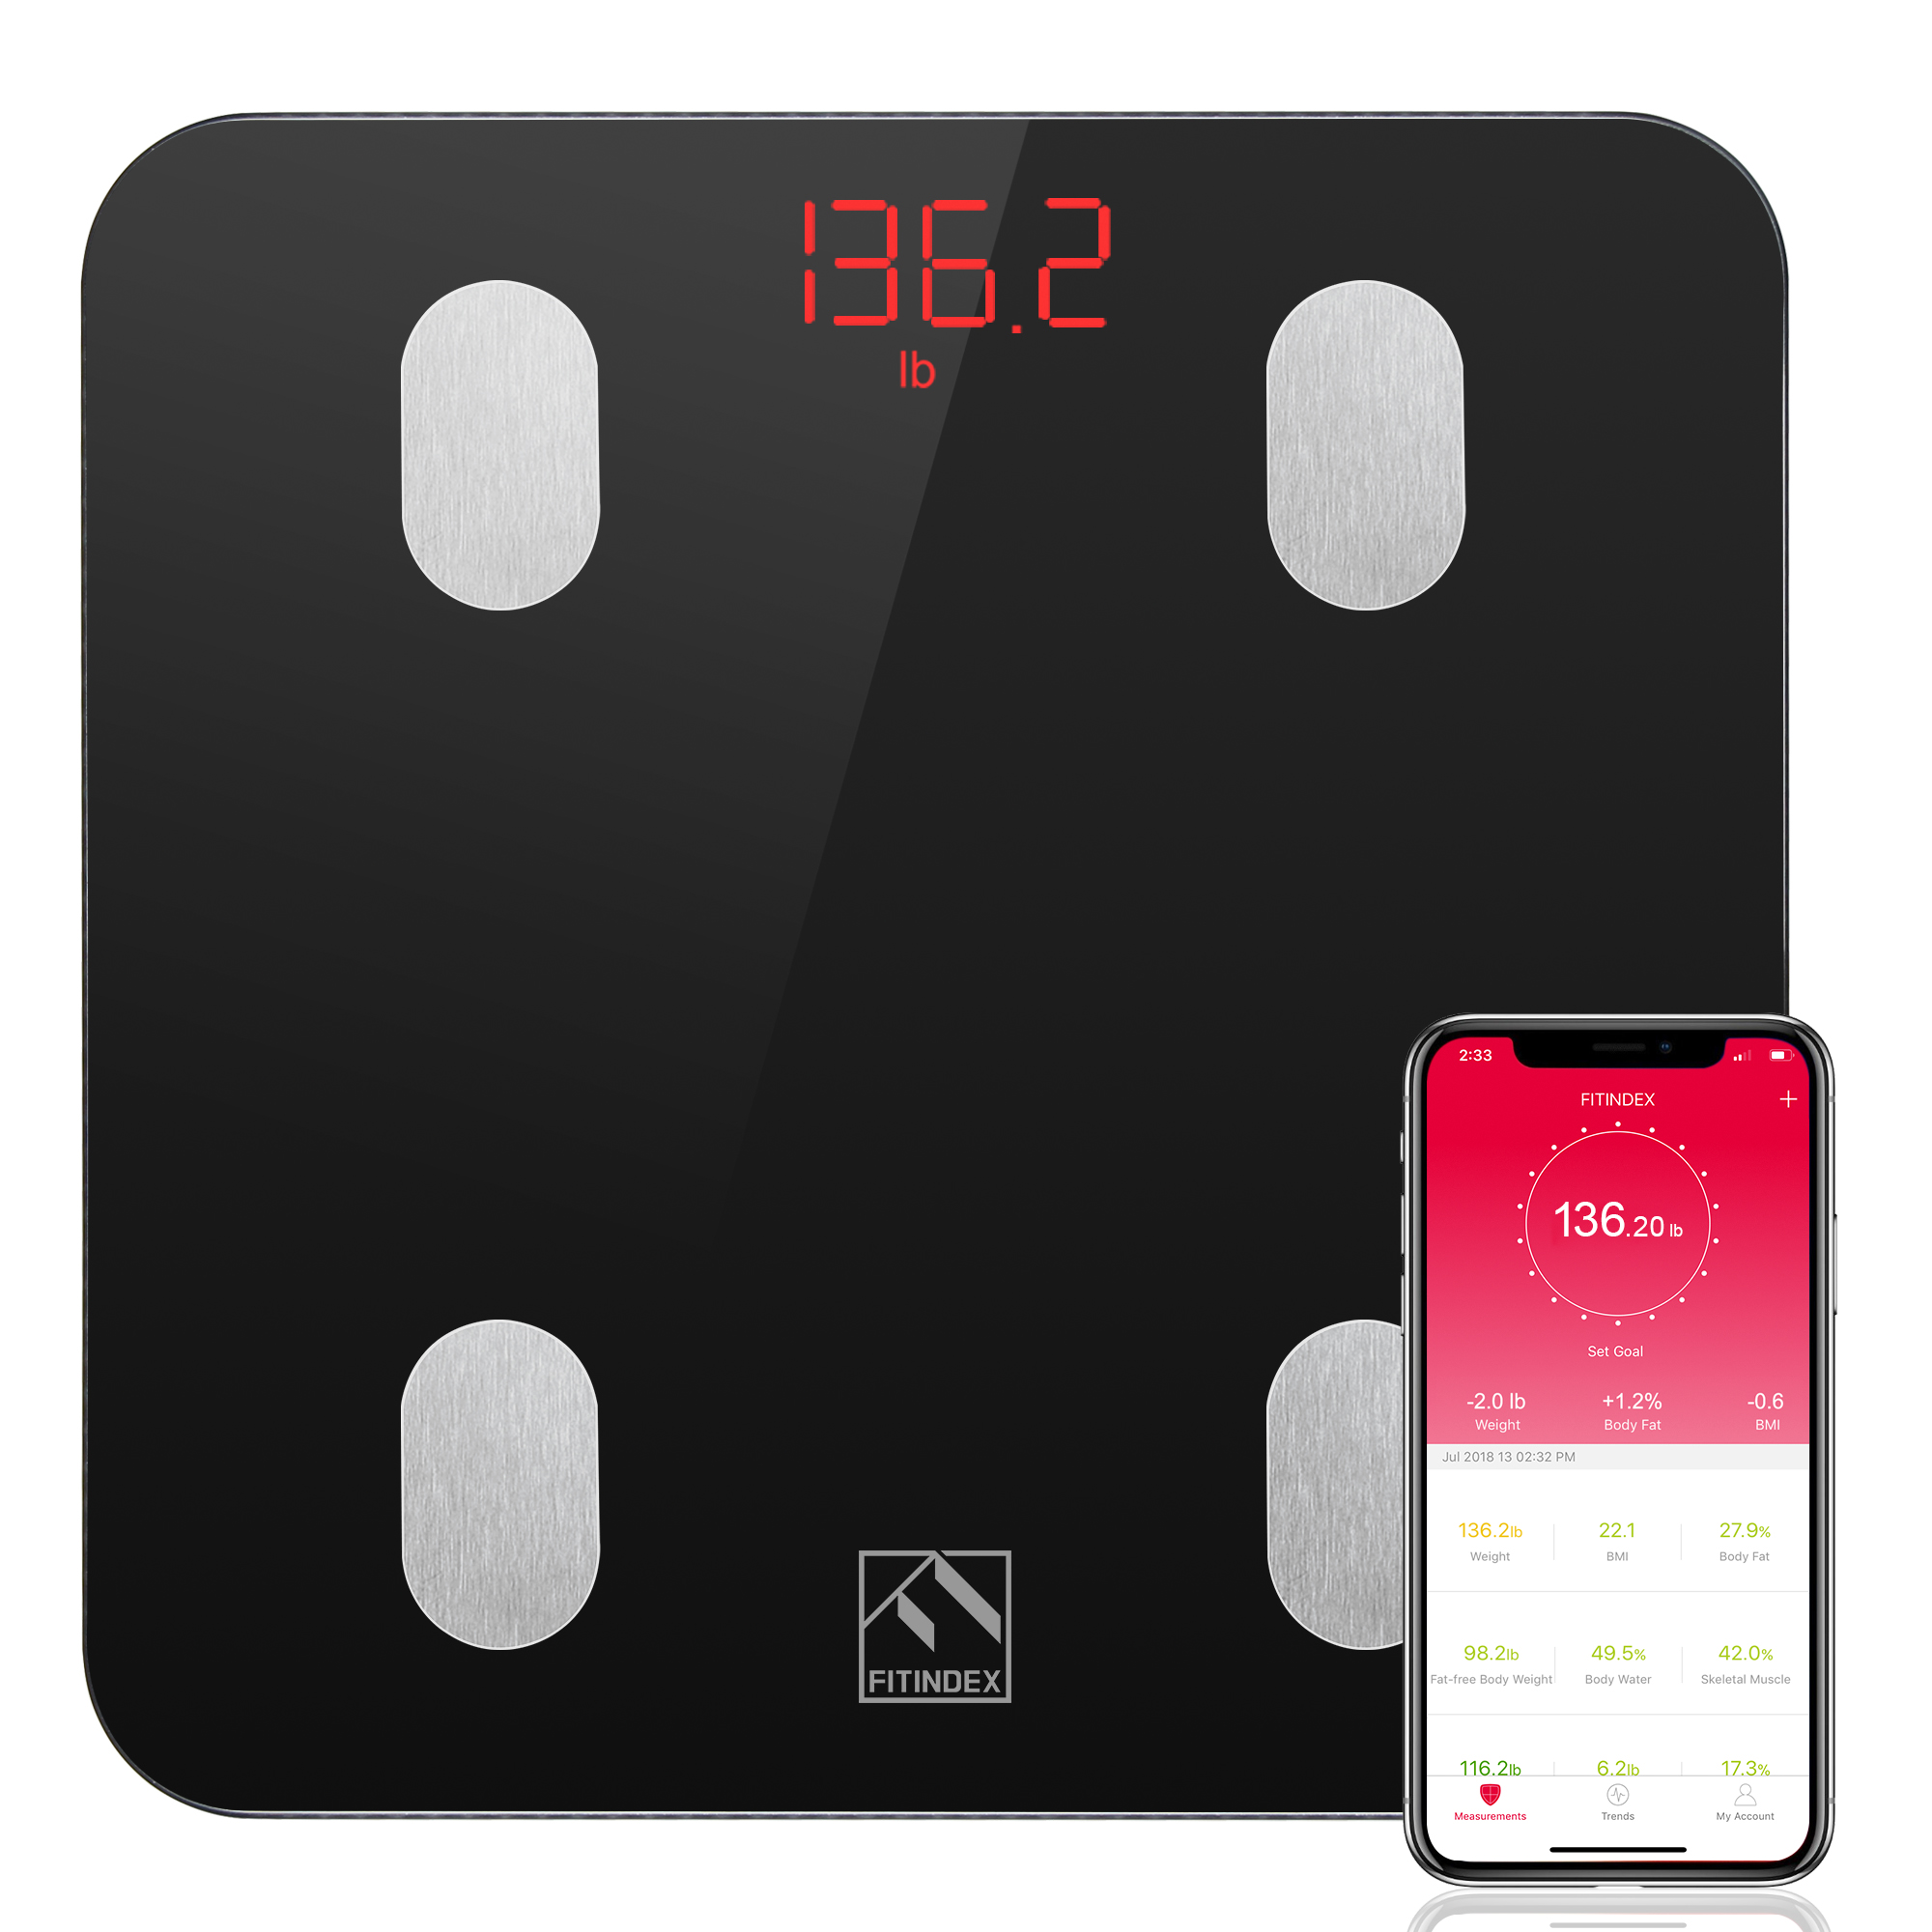 FITINDEX Bluetooth Body Fat Scale, Smart Wireless Digital Weight Scale, Body Composition Monitor Health Analyzer with Smartphone App for Body Weight, Fat, Water, BMI, BMR, Muscle Mass - image 1 of 10